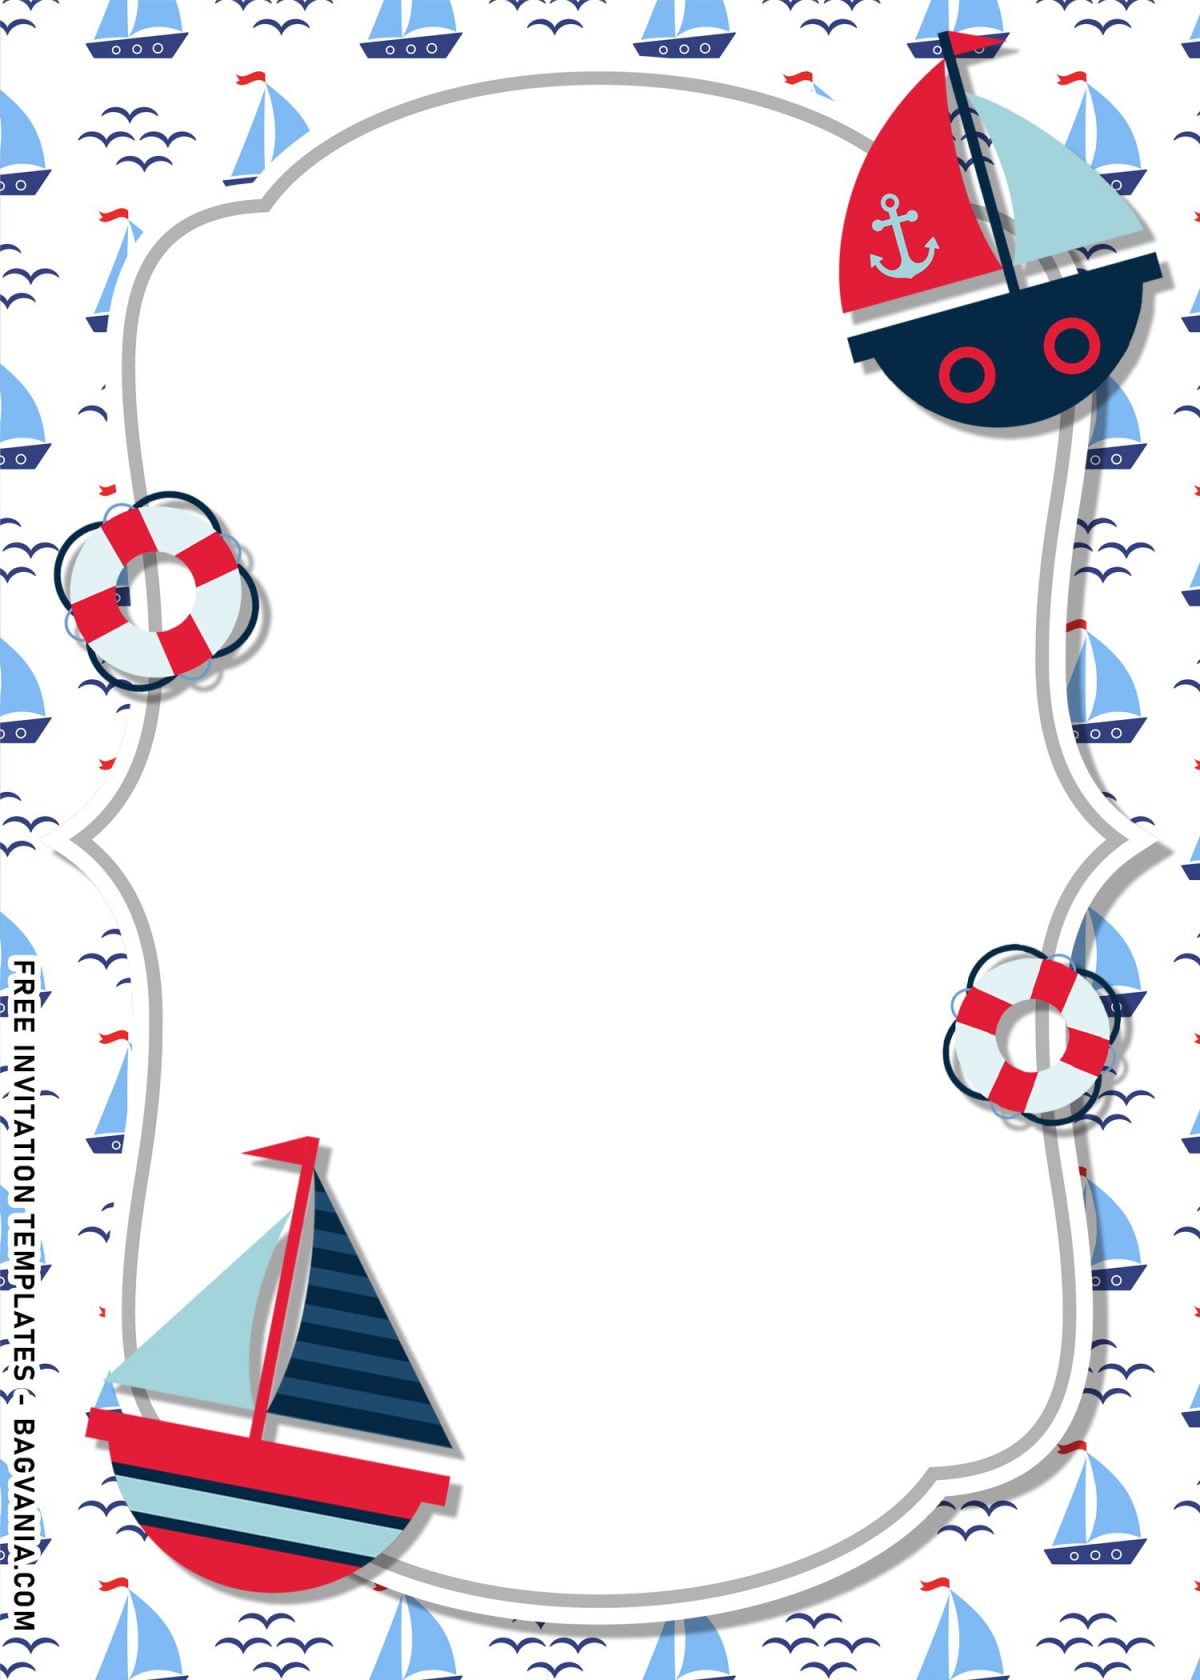 11+ Nautical Themed Birthday Invitation Templates For Your Kid’s Birthday Bash and has White background with cute sail boat pattern